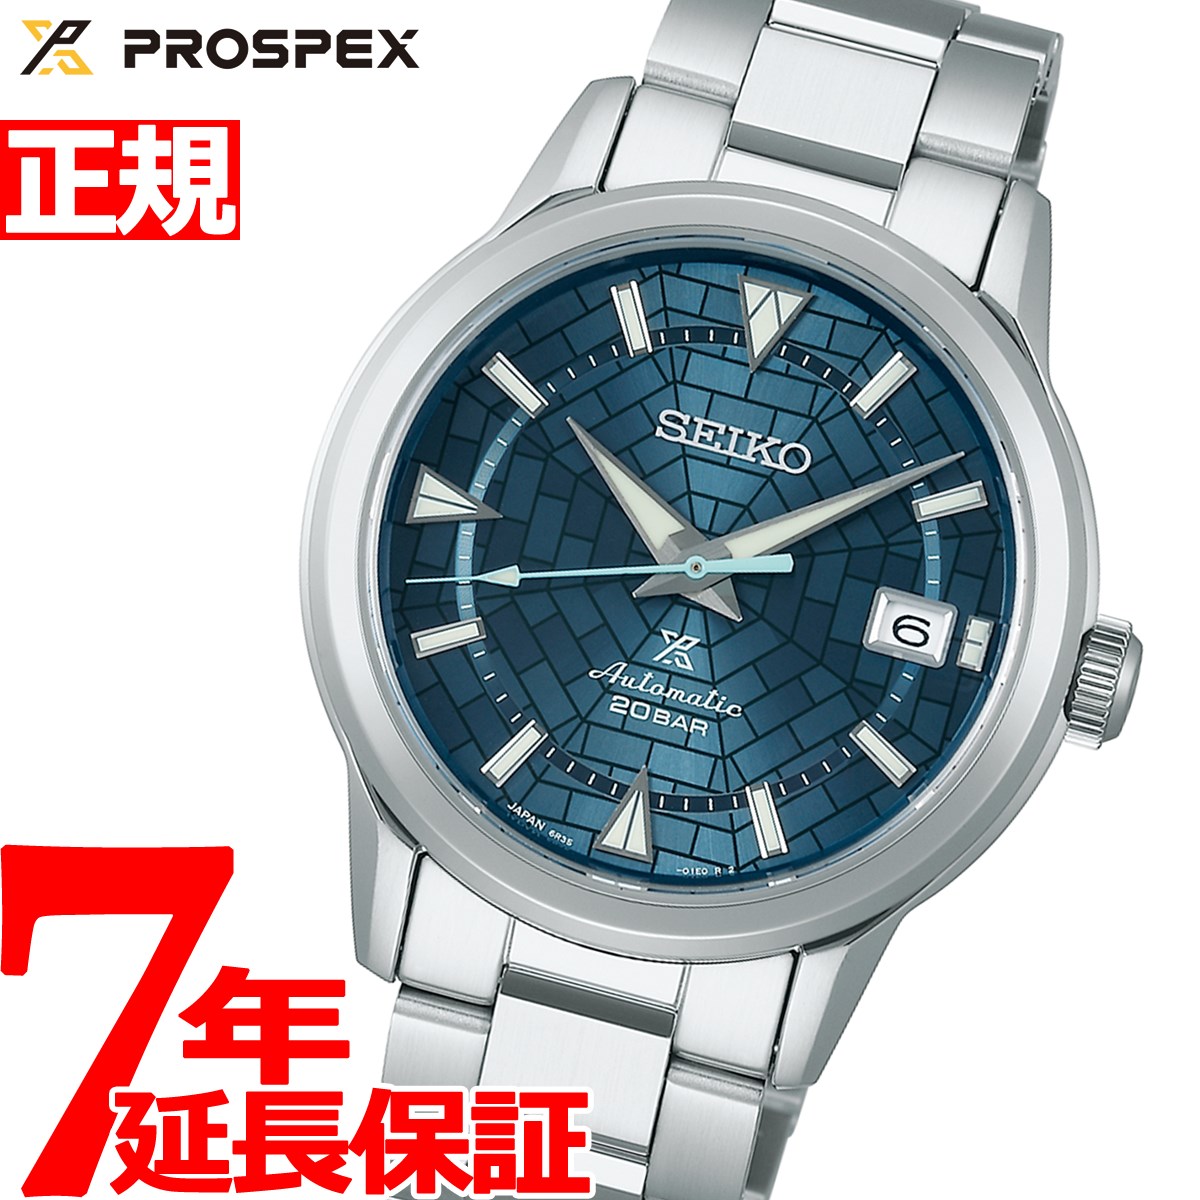 From 0:00 on the 10th! Up to 2000 yen OFF coupon & in-store points up to   times! Until 23:59 on the 10th] Seiko Prospex Alpinist SBDC151 First  Alpinist Contemporary Design Seiko